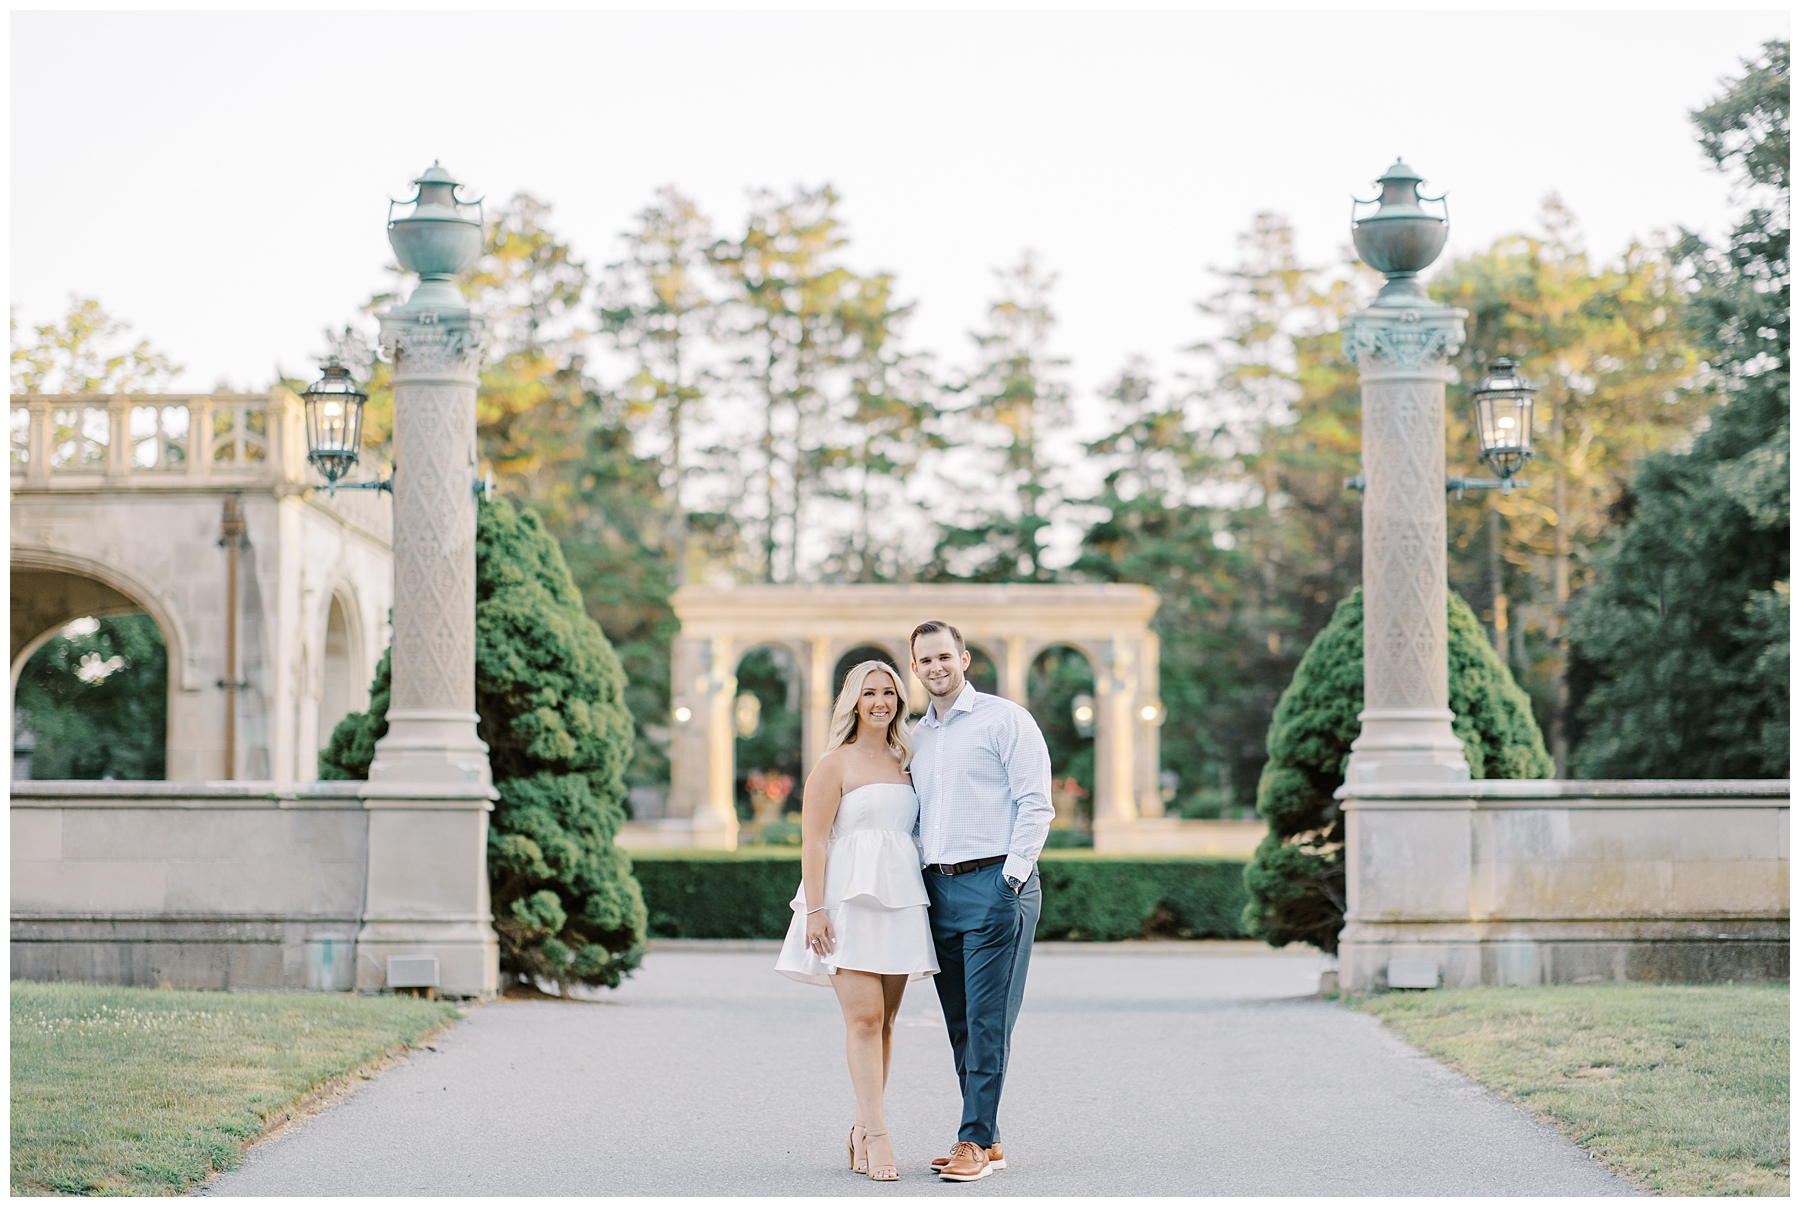 Ochre Court Newport Engagement session photographed by Stephanie Berenson Photography